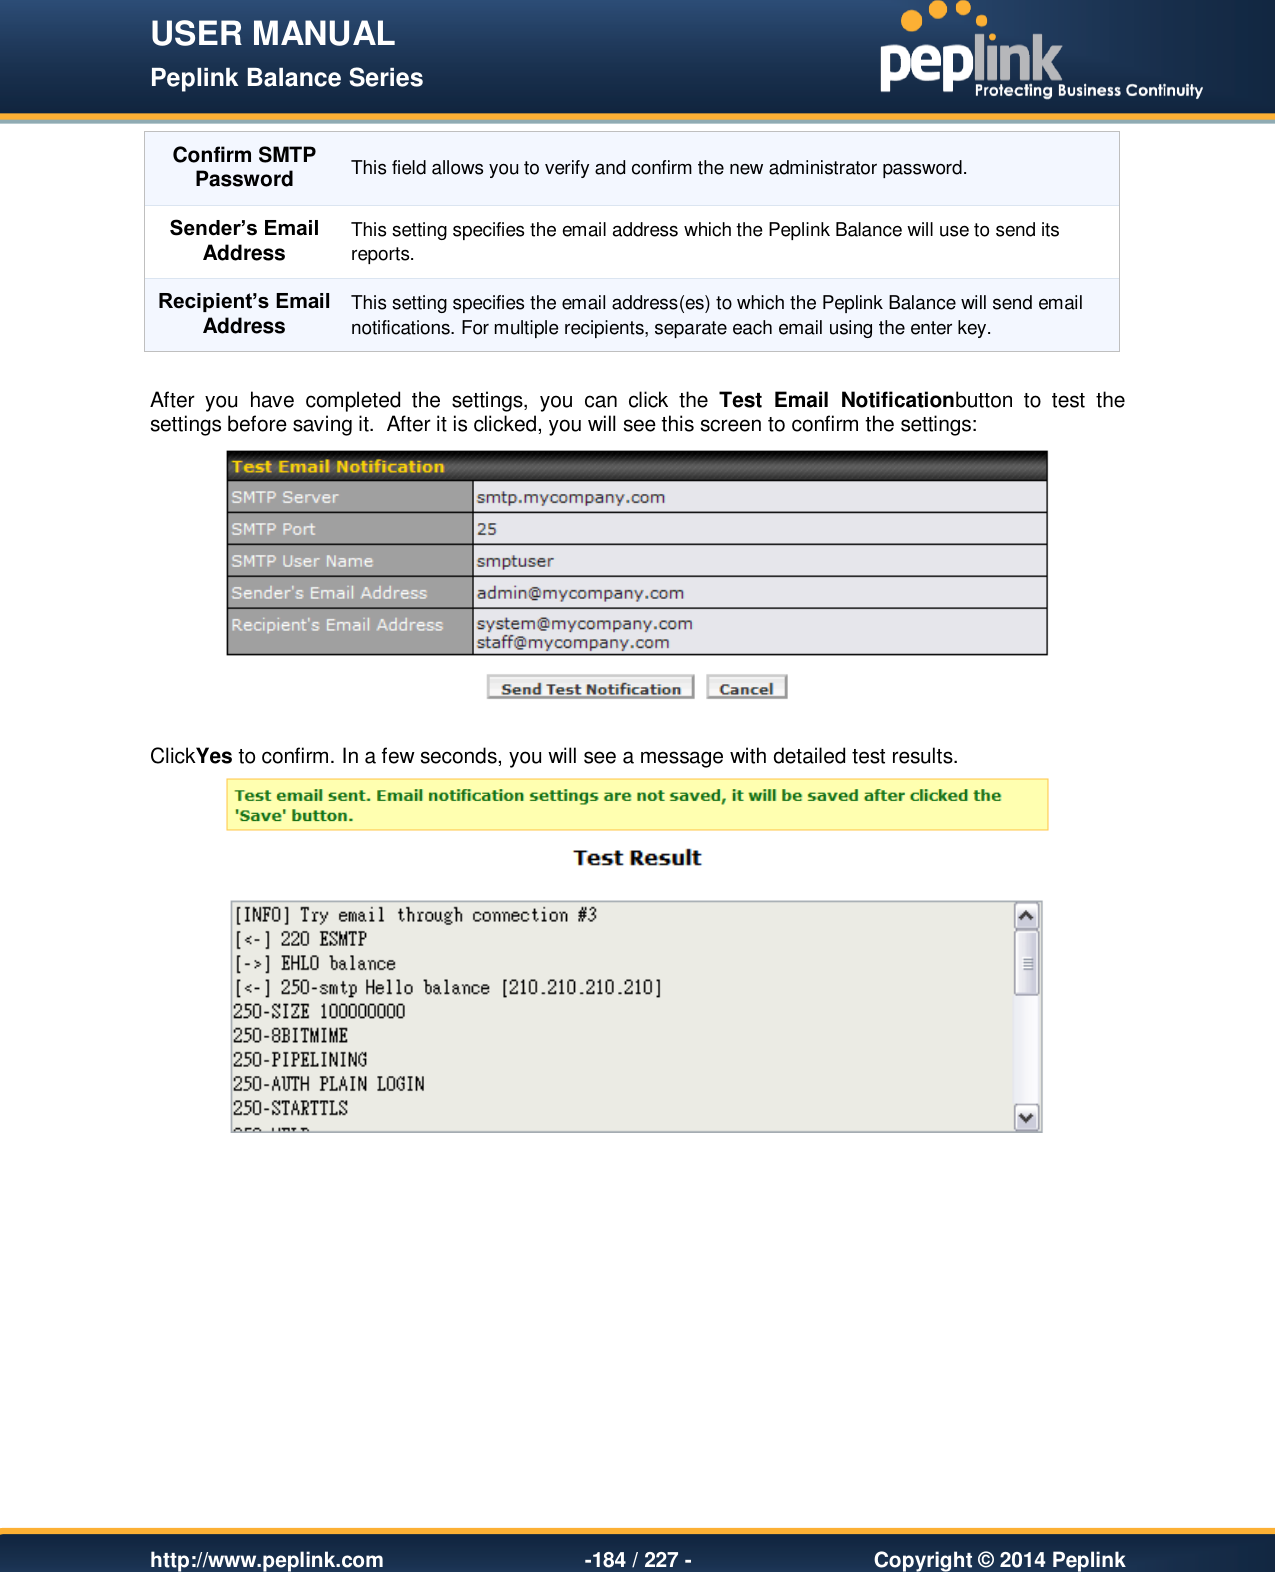 USER MANUAL Peplink Balance Series   http://www.peplink.com -184 / 227 -  Copyright © 2014 Peplink Confirm SMTP Password This field allows you to verify and confirm the new administrator password. Sender’s Email Address This setting specifies the email address which the Peplink Balance will use to send its reports. Recipient’s Email Address This setting specifies the email address(es) to which the Peplink Balance will send email notifications. For multiple recipients, separate each email using the enter key.  After  you  have  completed  the  settings,  you  can  click  the  Test  Email  Notificationbutton  to  test  the settings before saving it.  After it is clicked, you will see this screen to confirm the settings:   ClickYes to confirm. In a few seconds, you will see a message with detailed test results.   